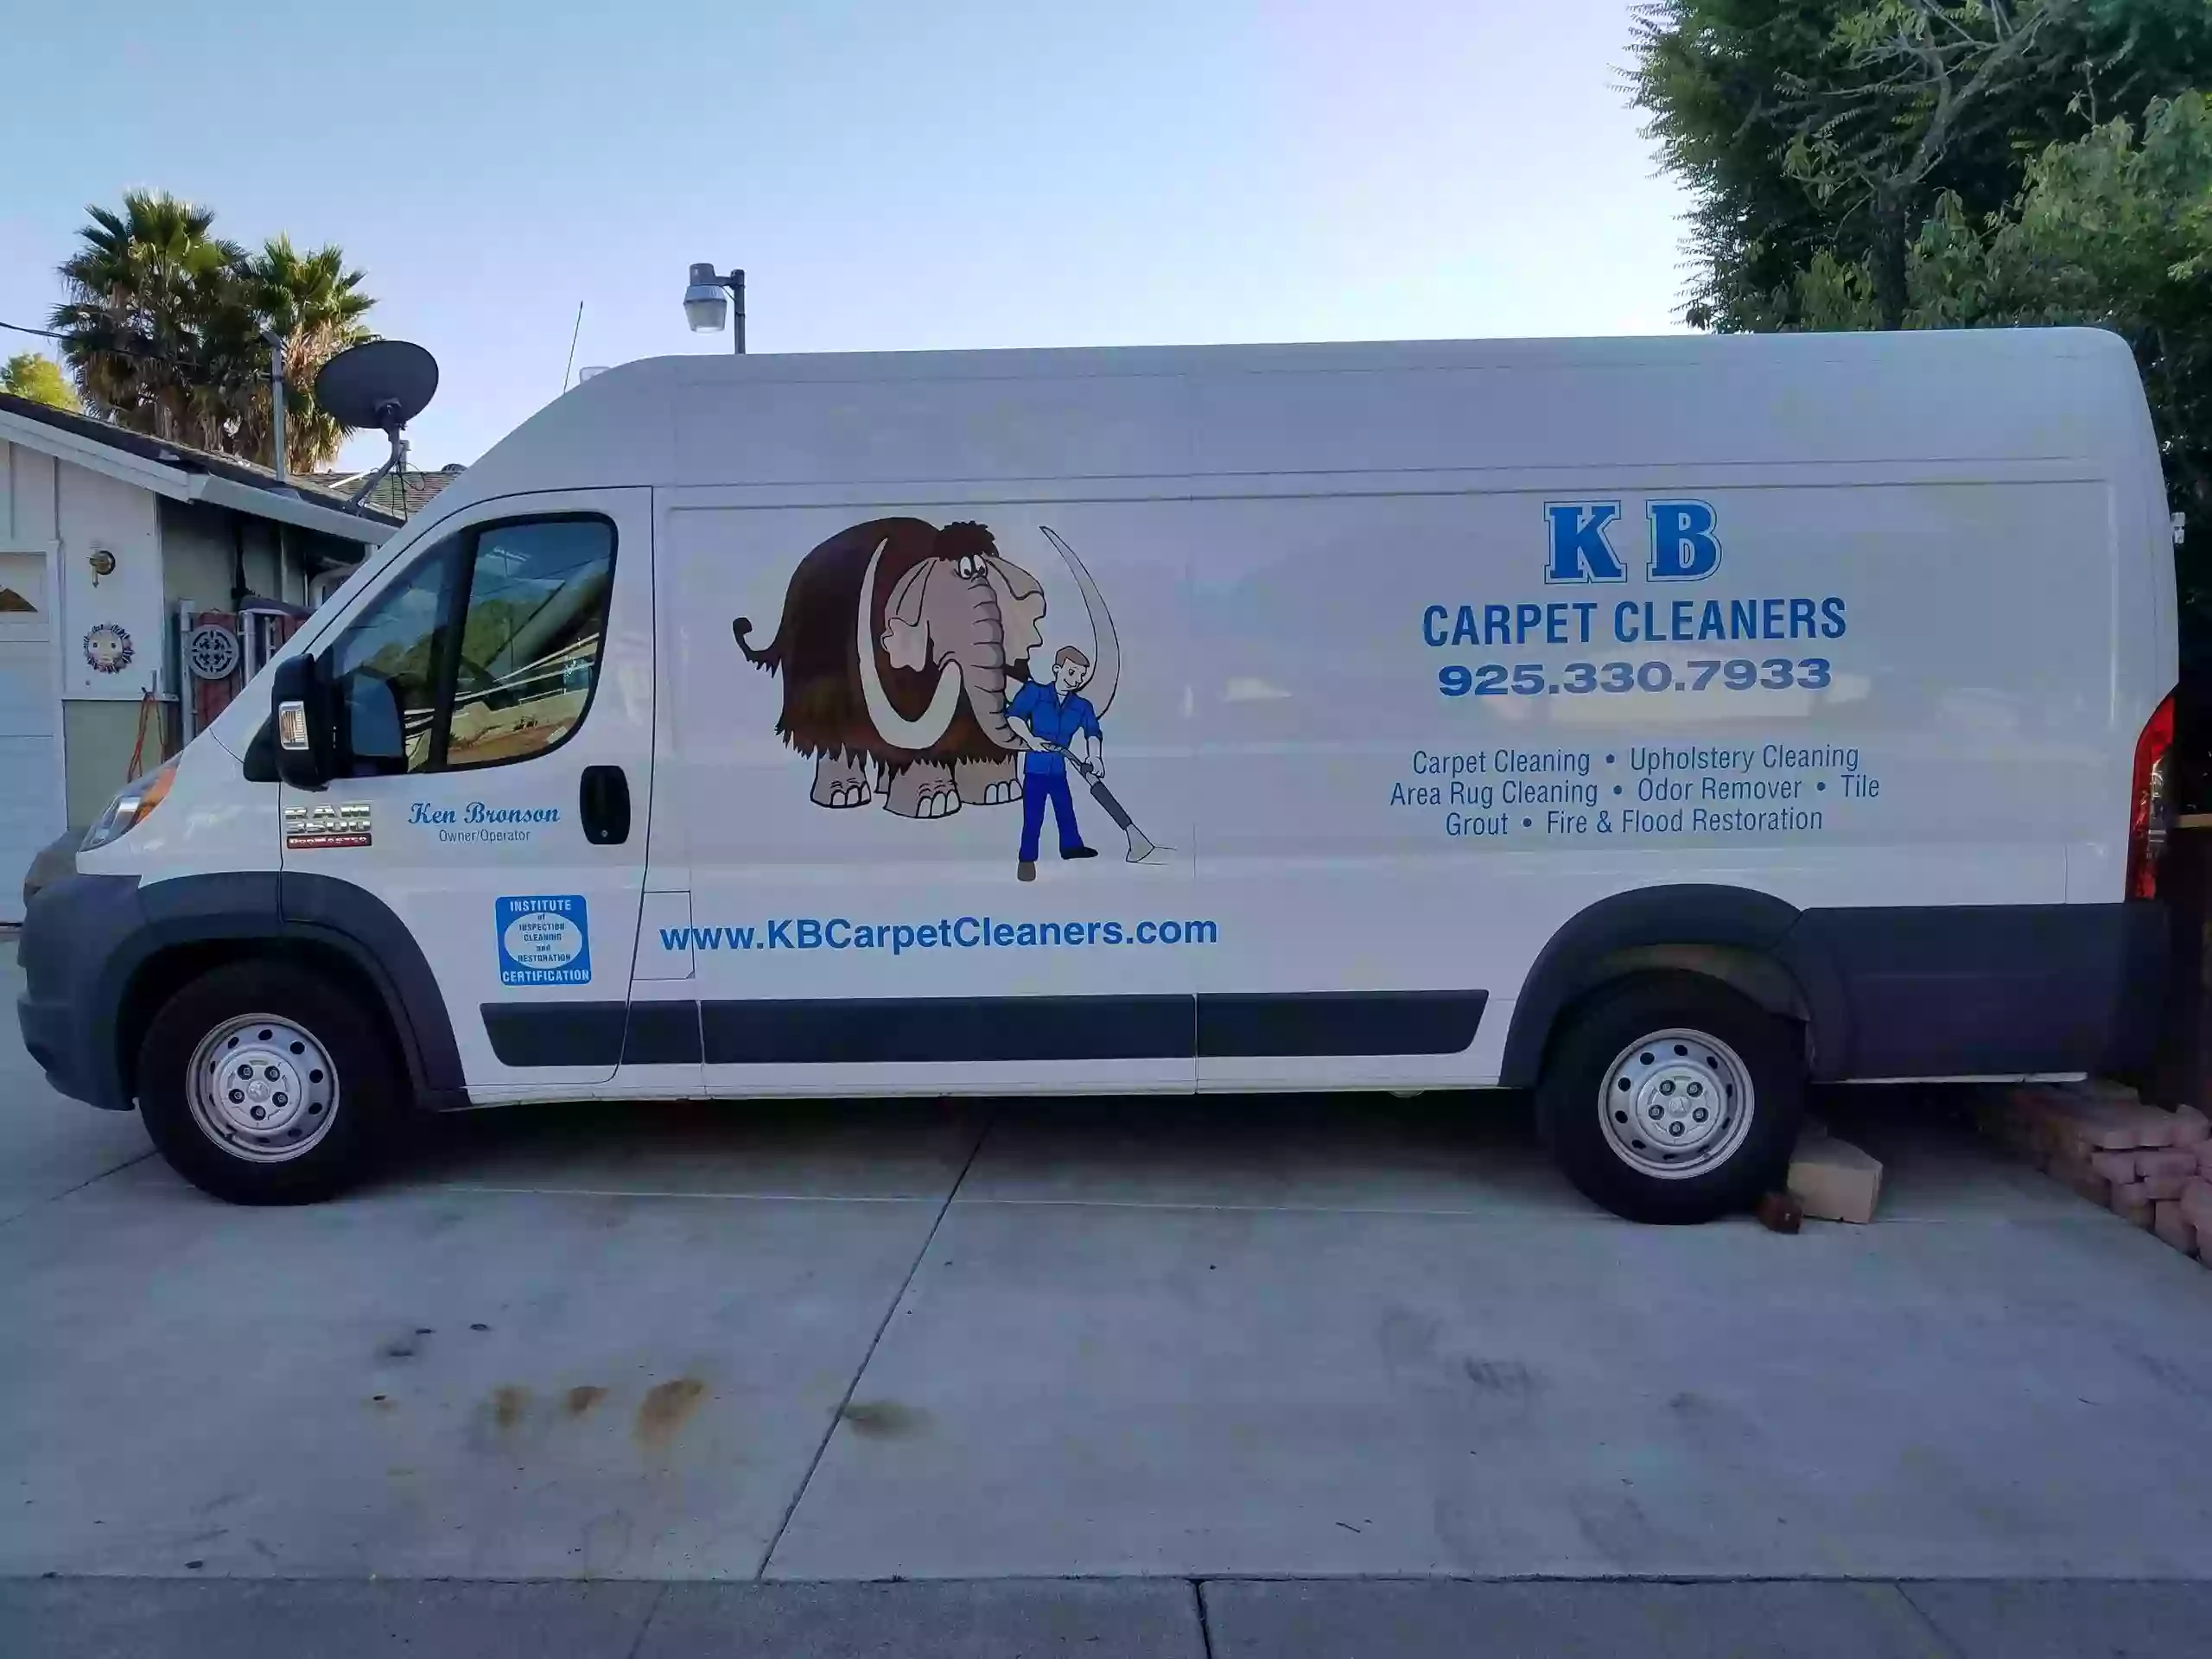 KB Carpet Cleaners